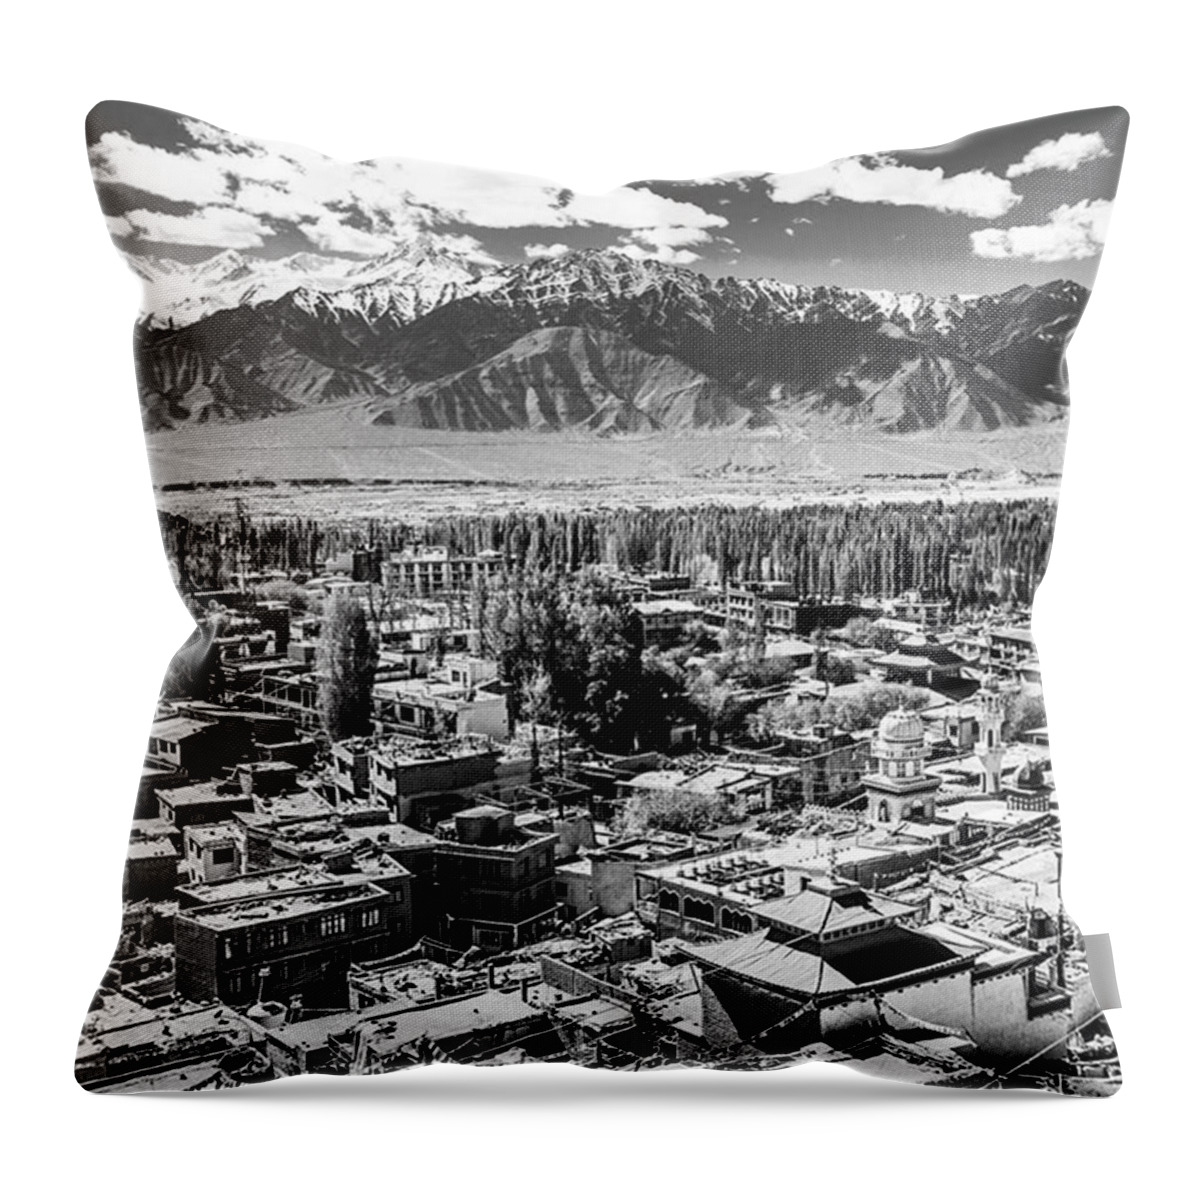 Leicagram Throw Pillow featuring the photograph The City Of Leh, From The Rooftops To by Aleck Cartwright